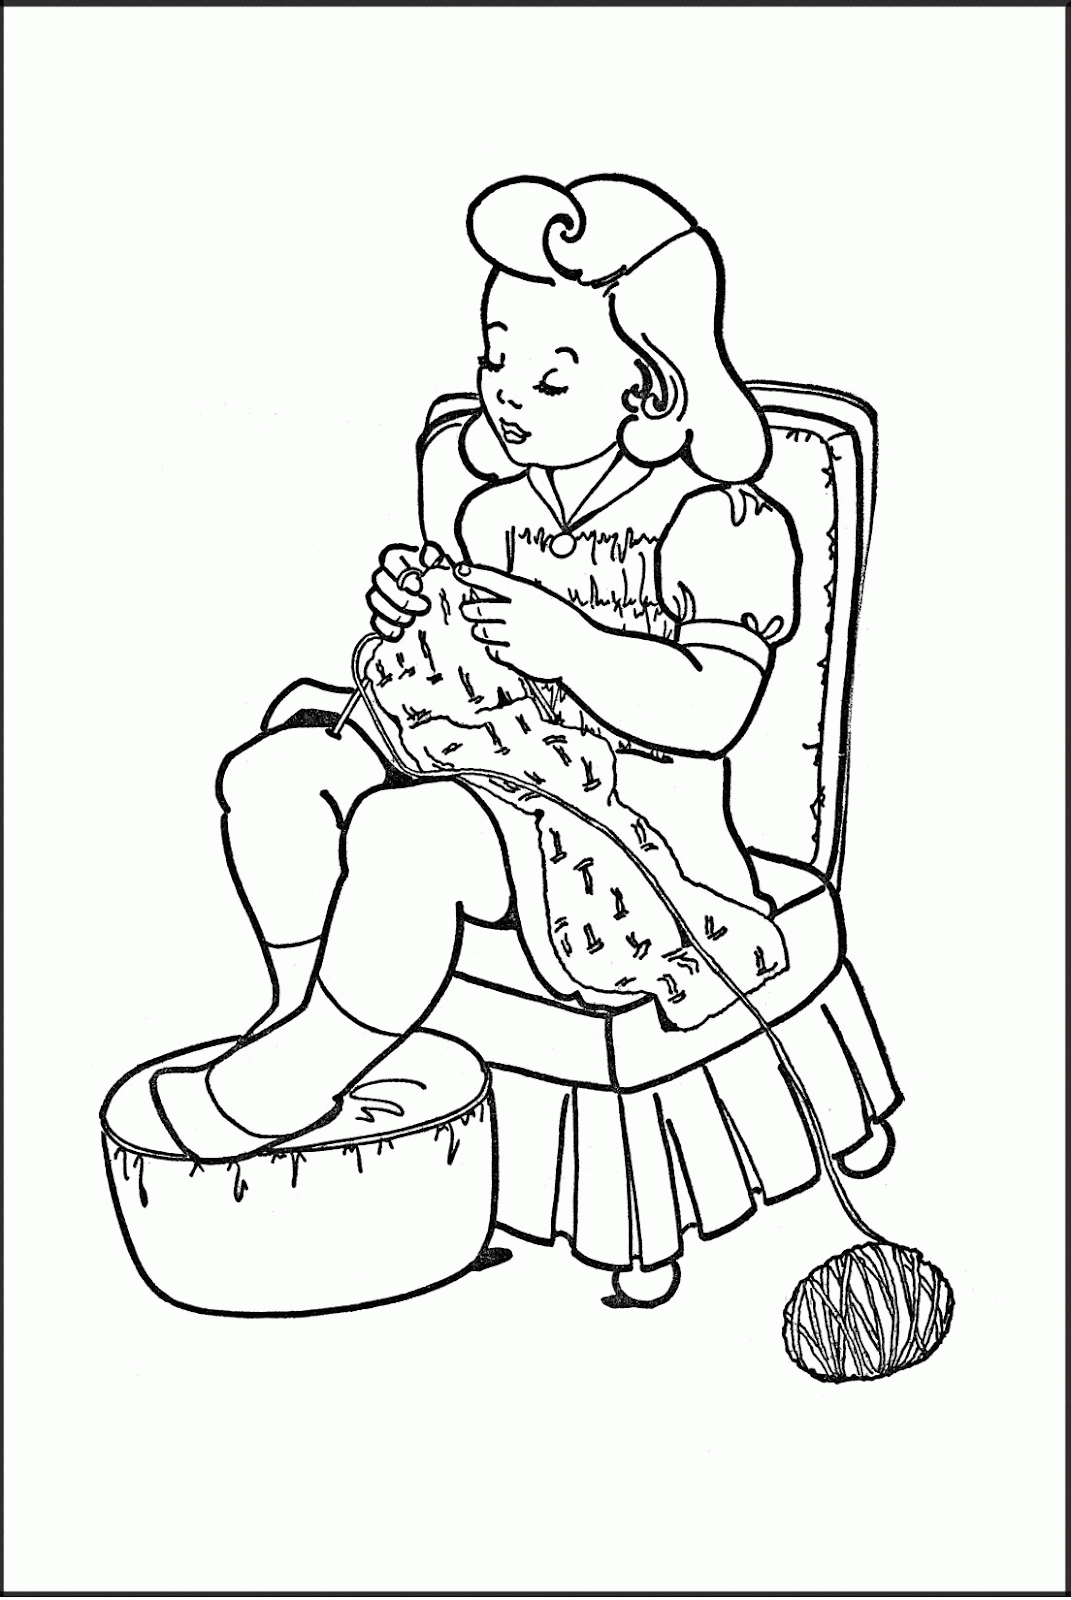 Kids Printable - Coloring Page - Girl Knitting - The Graphics Fairy